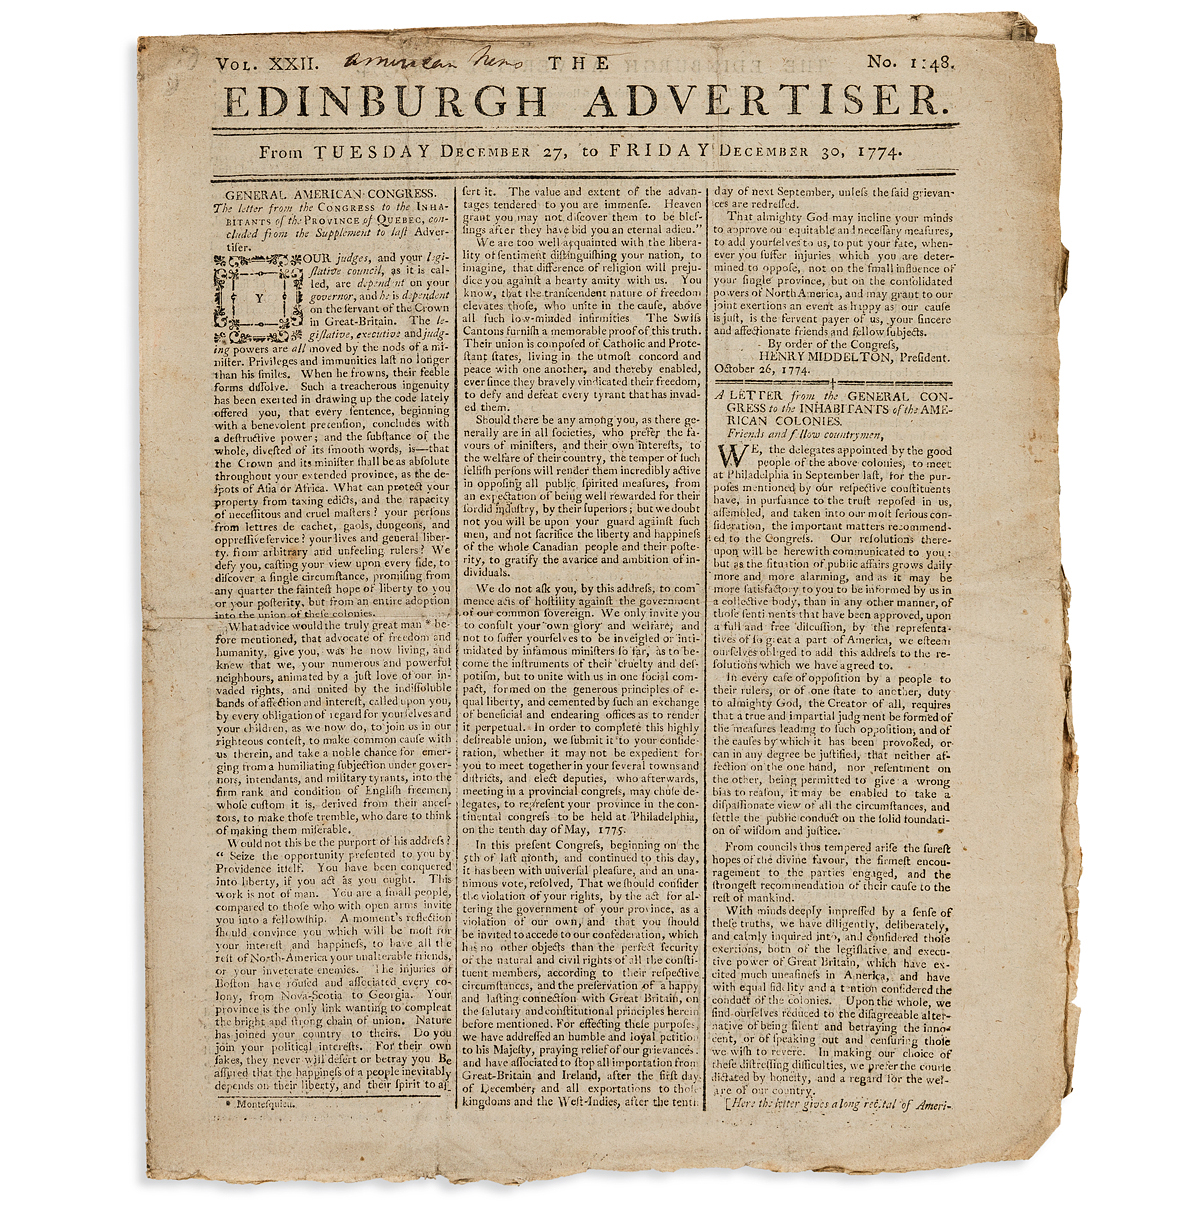 (AMERICAN REVOLUTION--PRELUDE.) Issue of Edinburgh Advertiser including a thanksgiving proclamation by John Hancock.